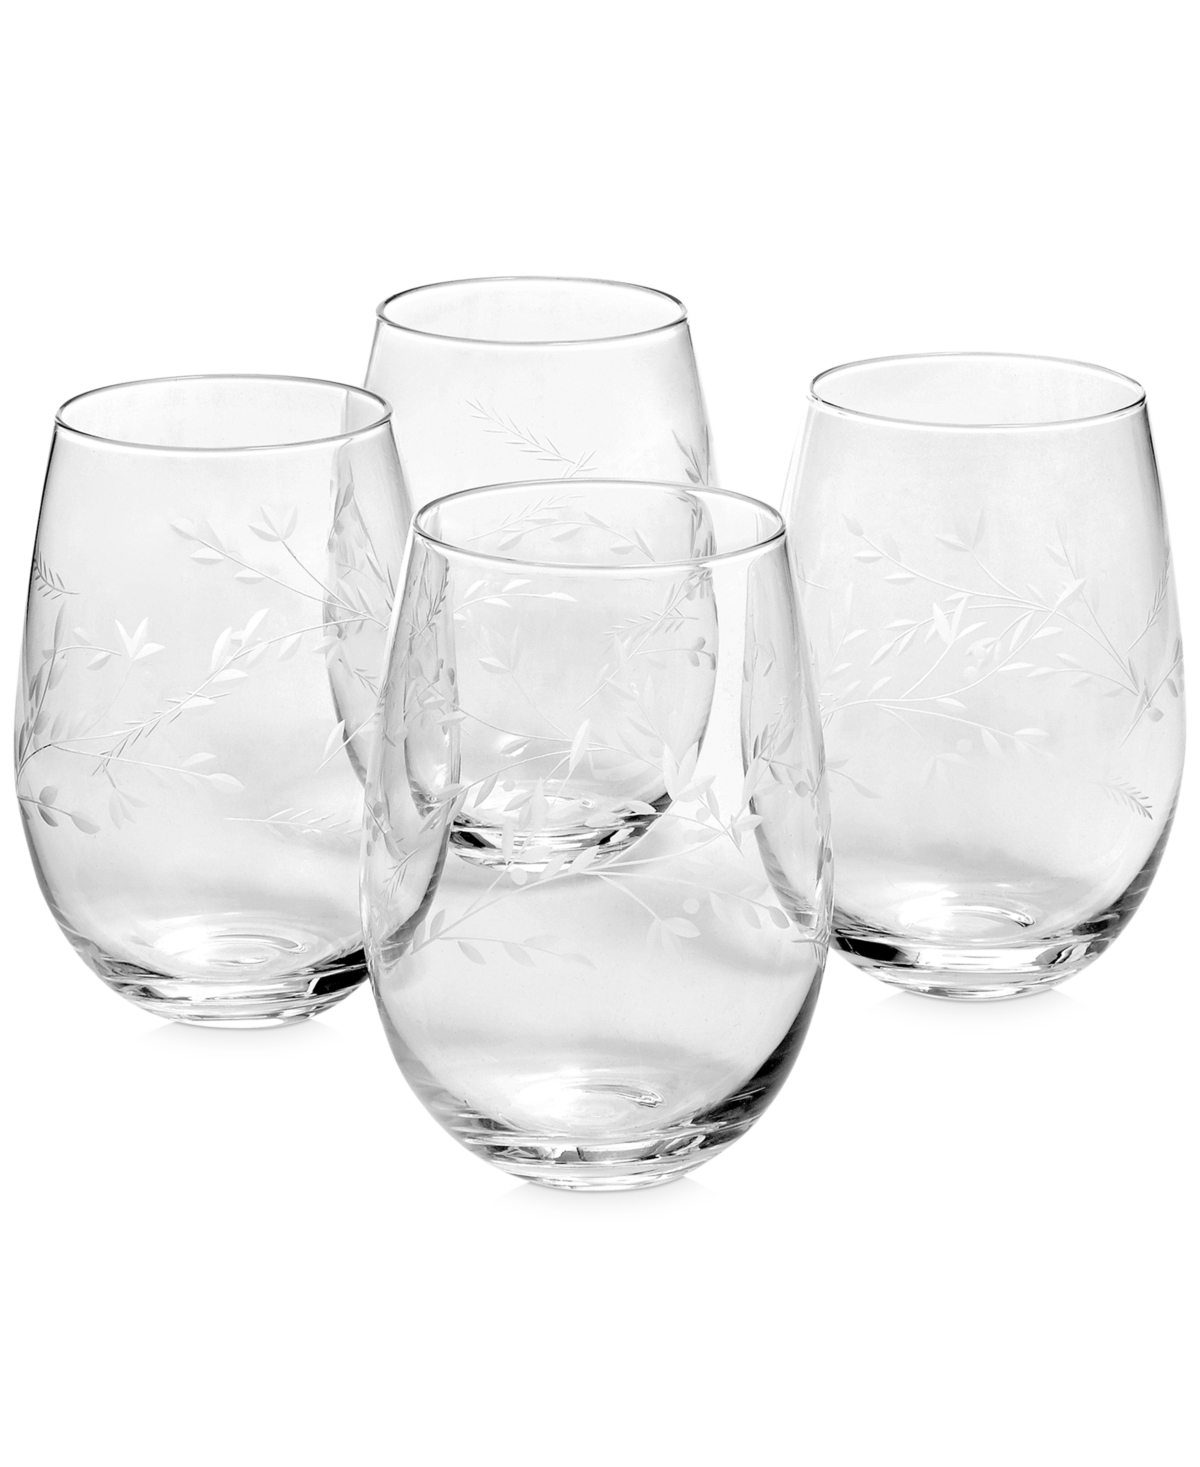 Details about   Qualia Orchard Etched Wine Glasses Set Of 4 NIB 